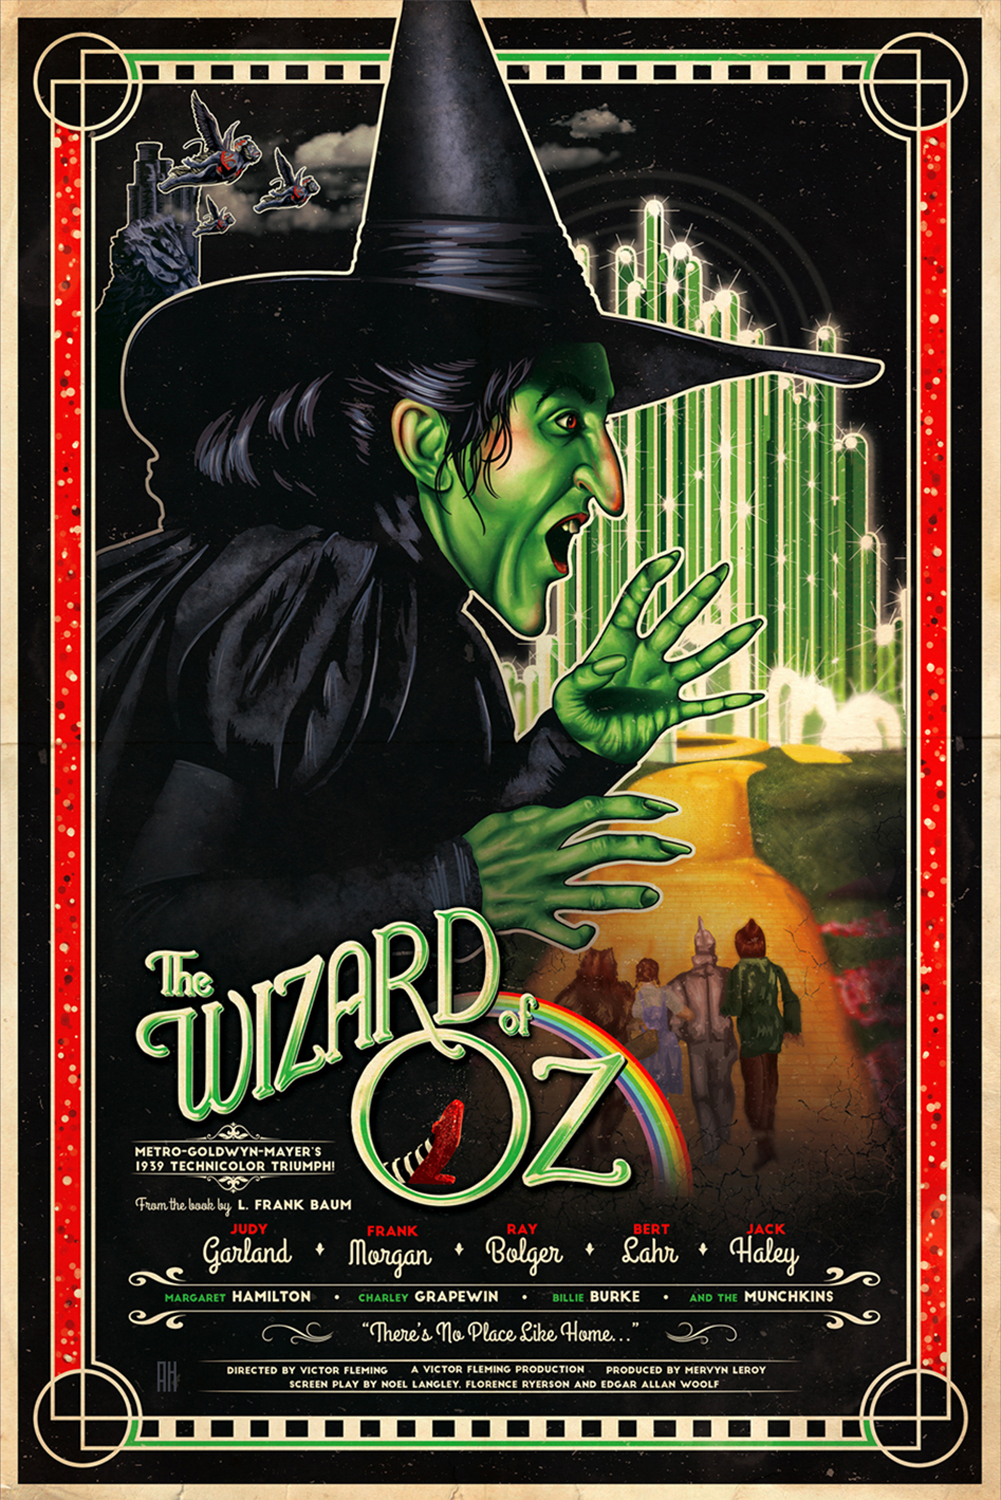 The Wizard of Oz 1939 Film